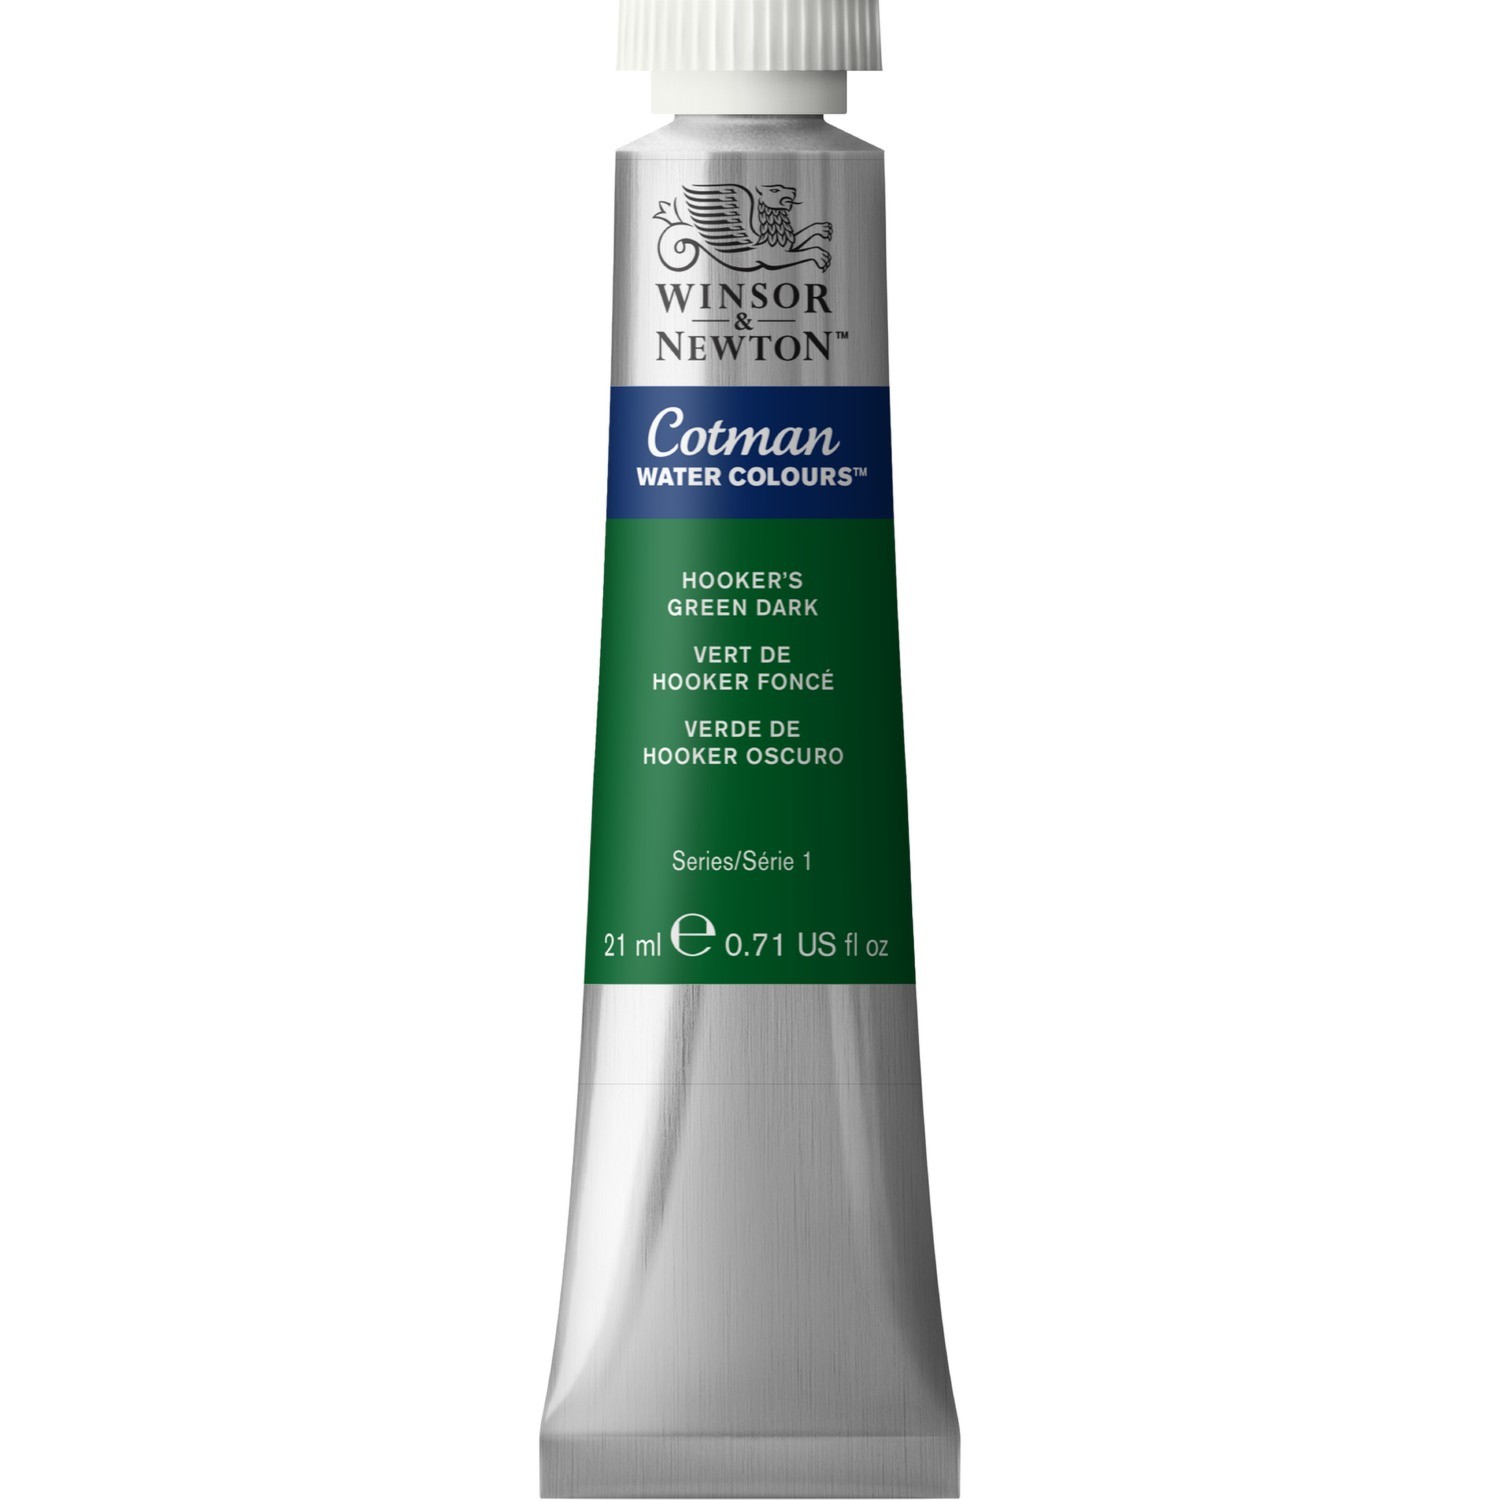 Winsor and Newton Cotman Watercolour Paint 21ml - Dark Hookers Green Image 1